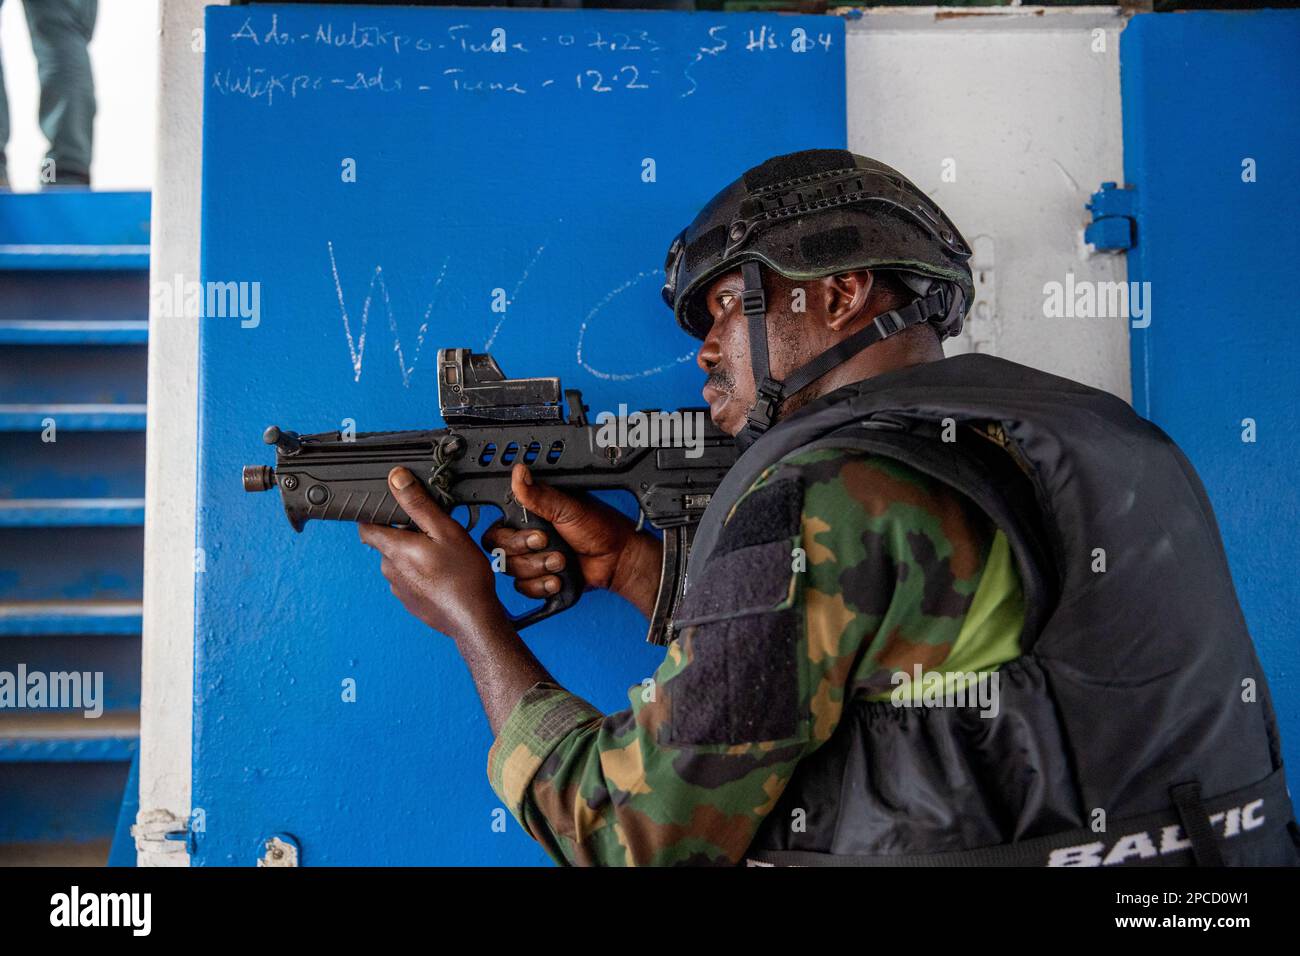 Volta, Ghana. 11th Mar, 2023. A member of the Nigeria Armed Forces begins clearing operations during a hostage rescue tactical training display onboard a ship during the annual Flintlock multi-national exercise, March 11, 2023 in Volta, Ghana. Credit: SSgt. Charles Brock/US Army Photo/Alamy Live News Stock Photo